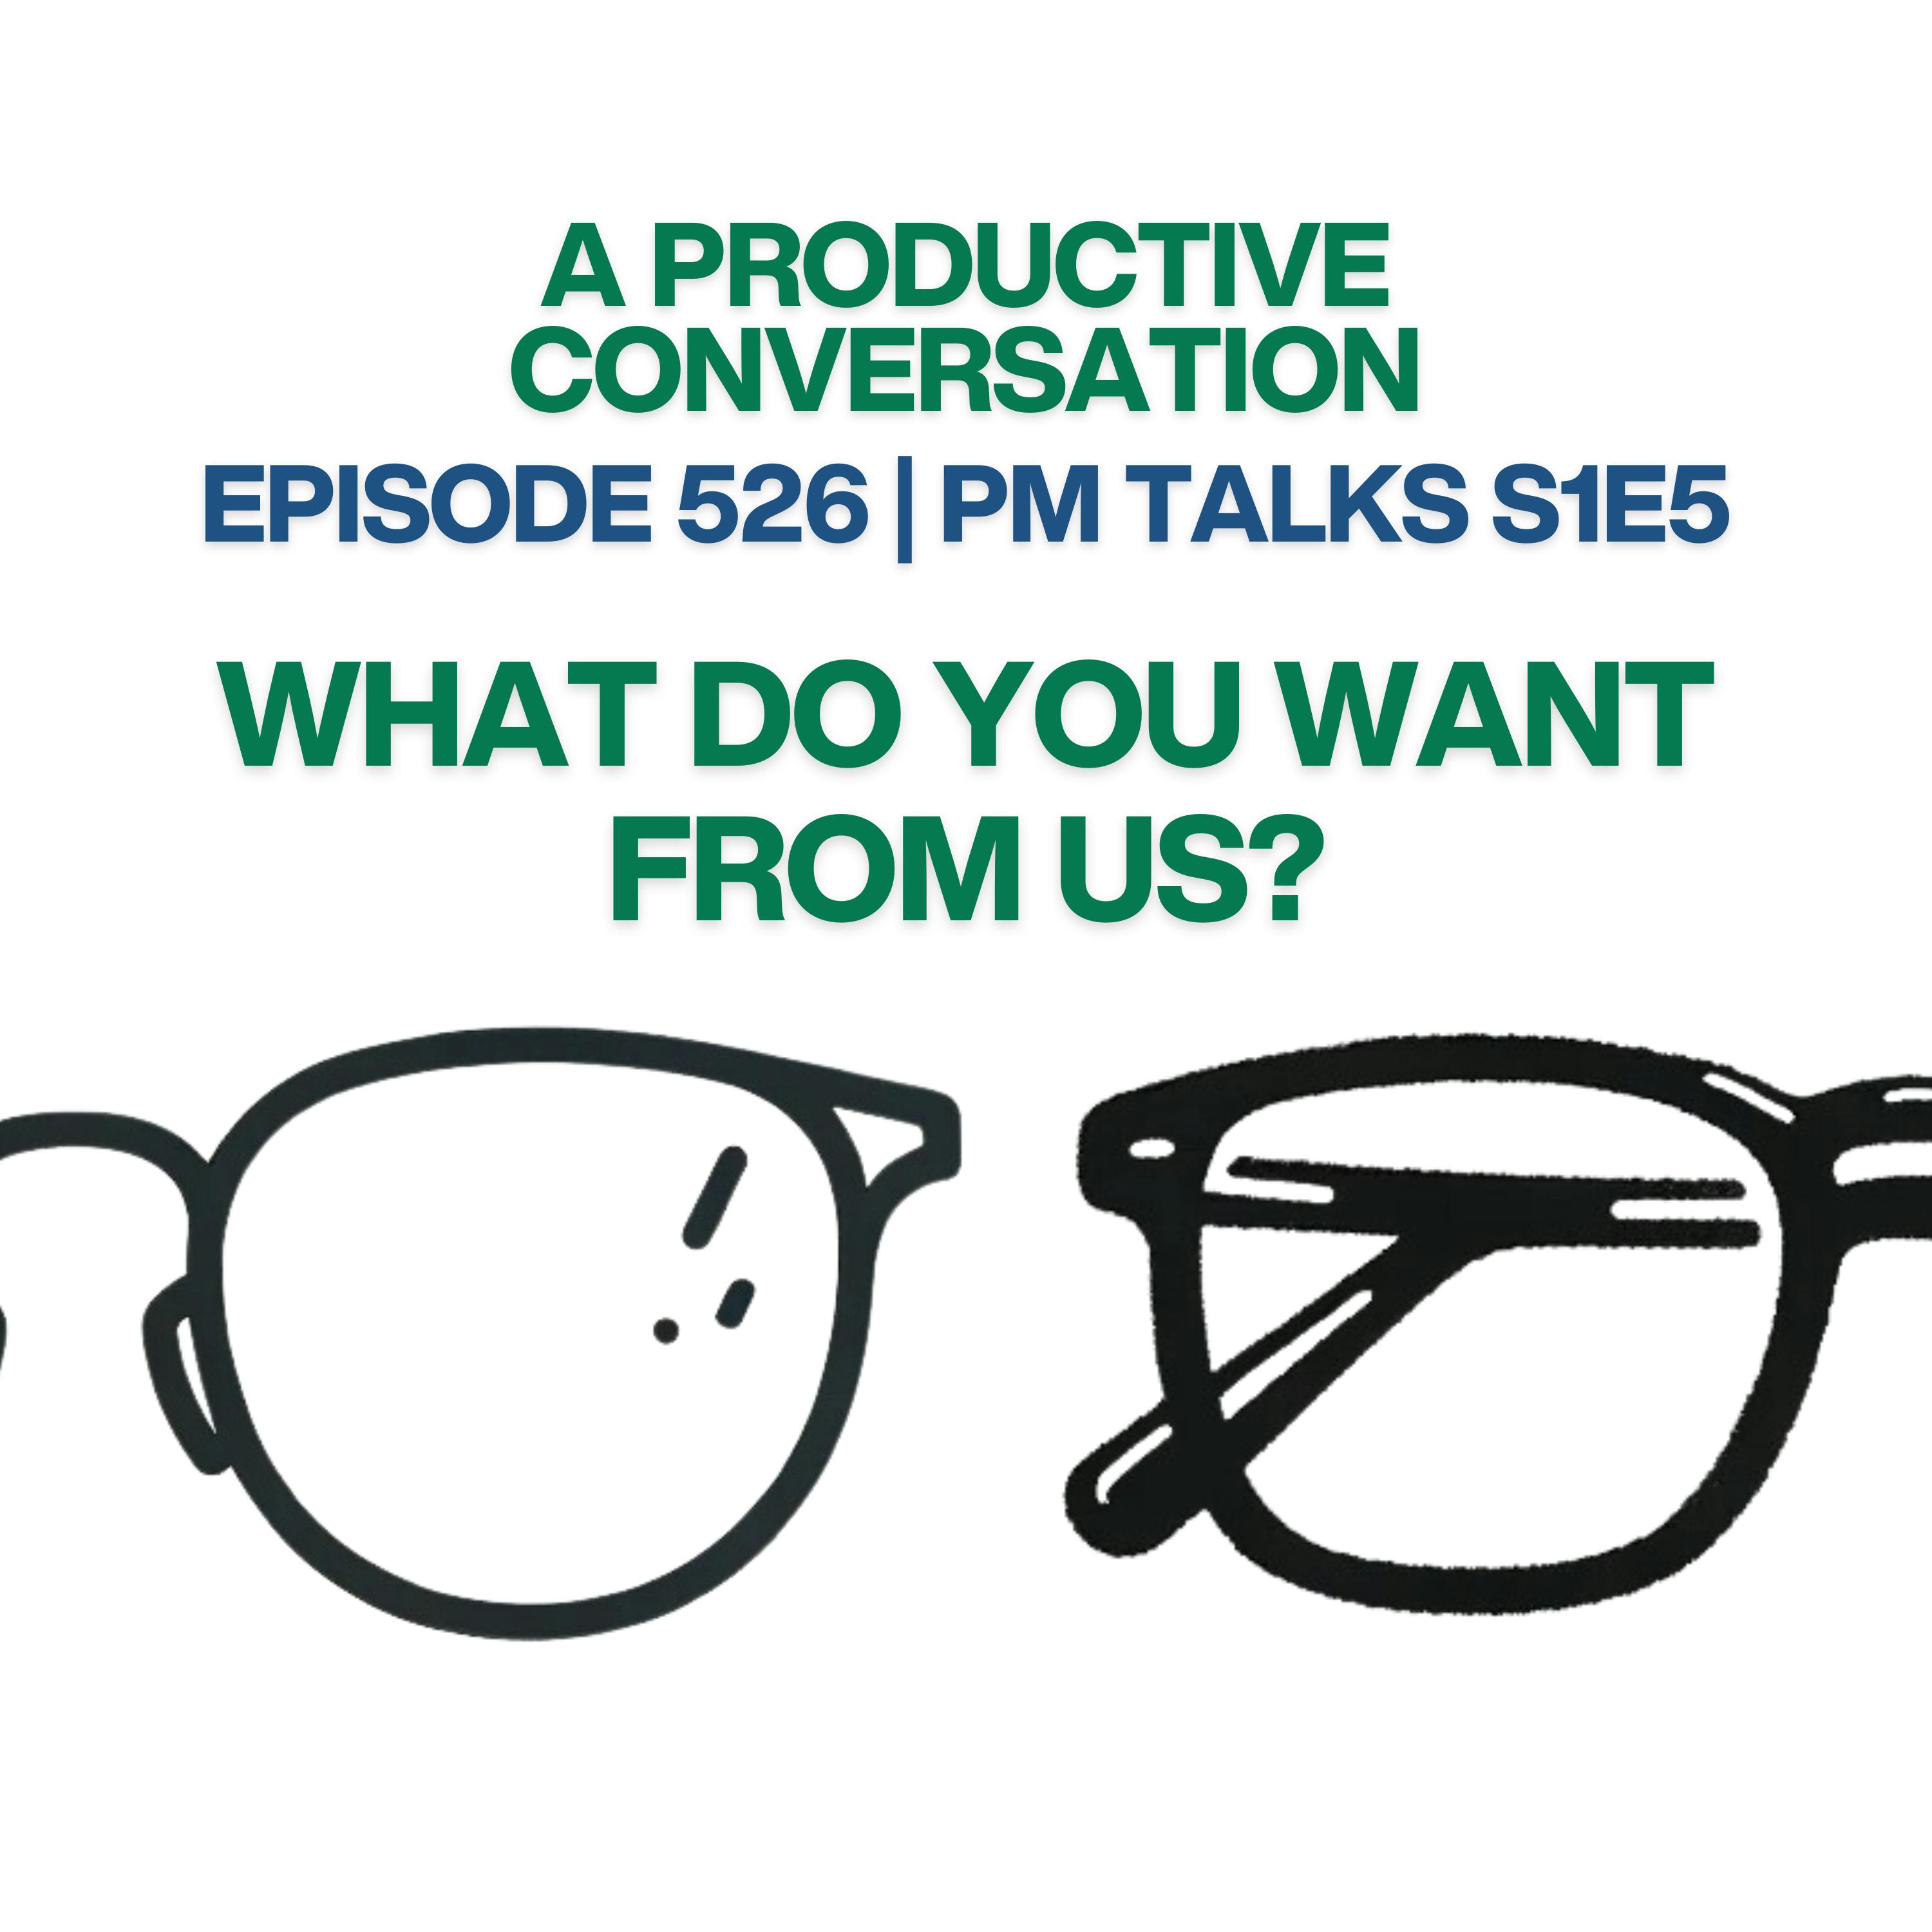 PM Talks S1E5: What Do You Want From Us?